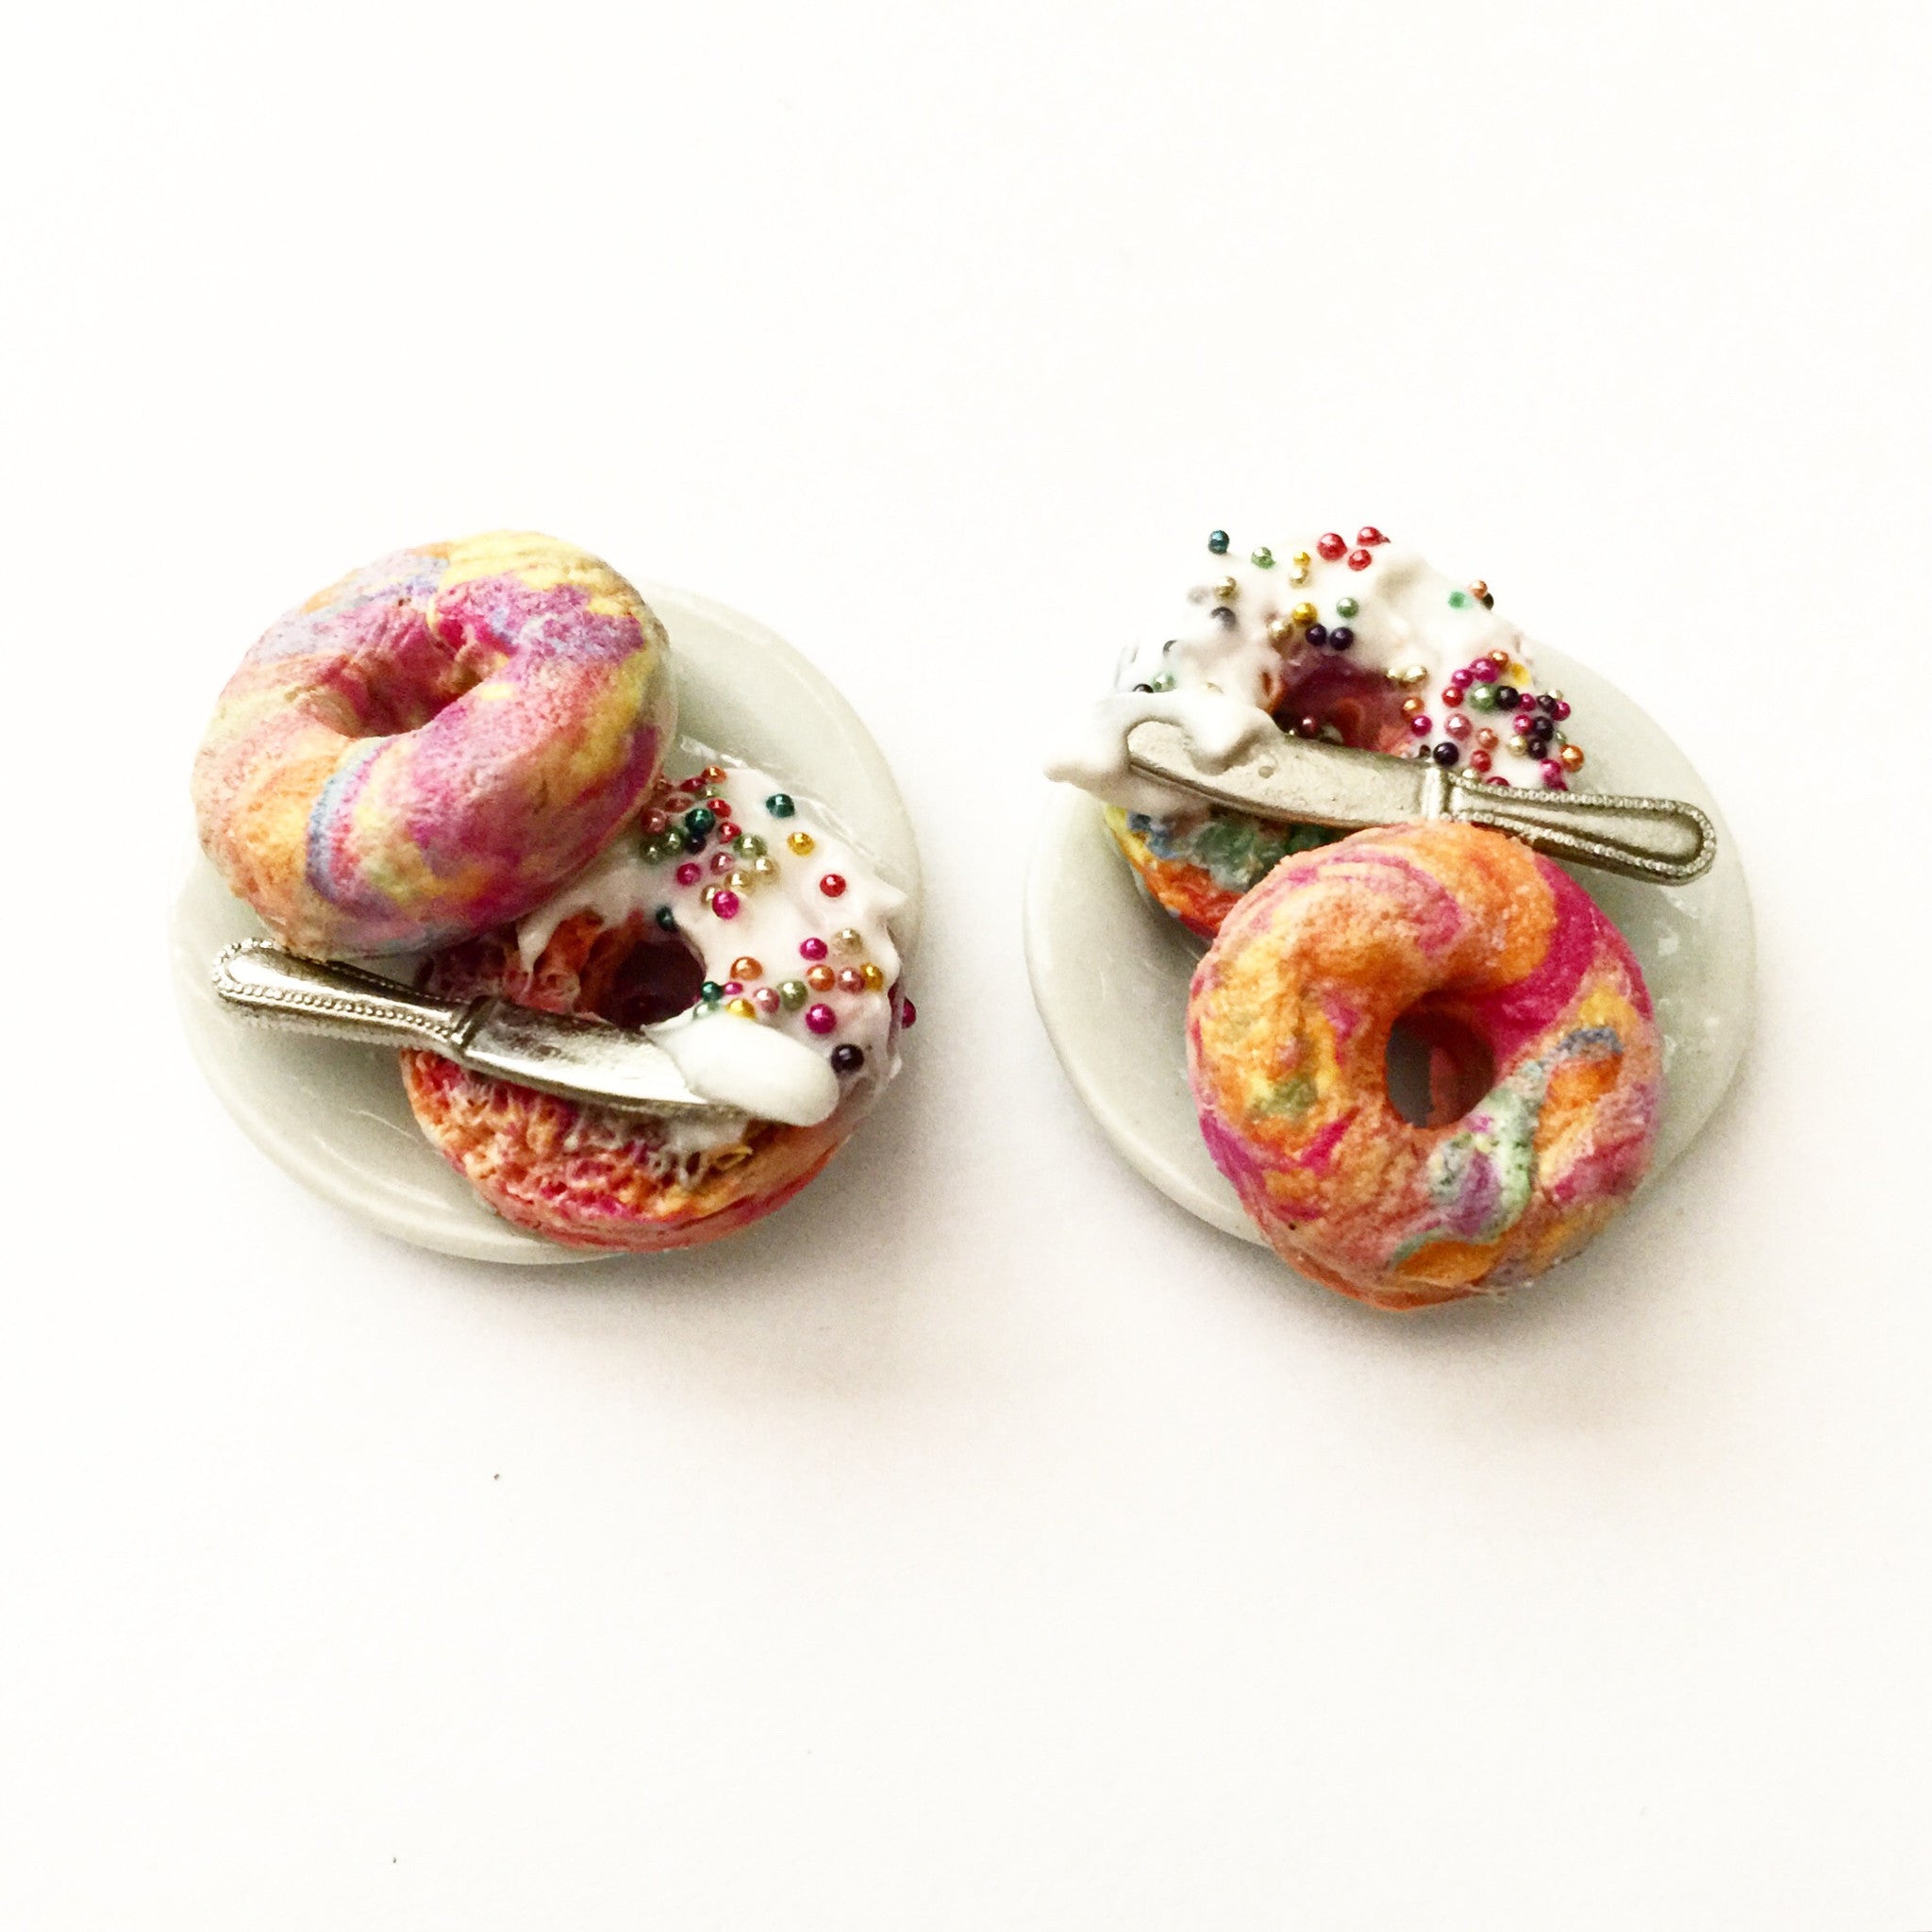 Rainbow Bagel Ring - Jillicious charms and accessories